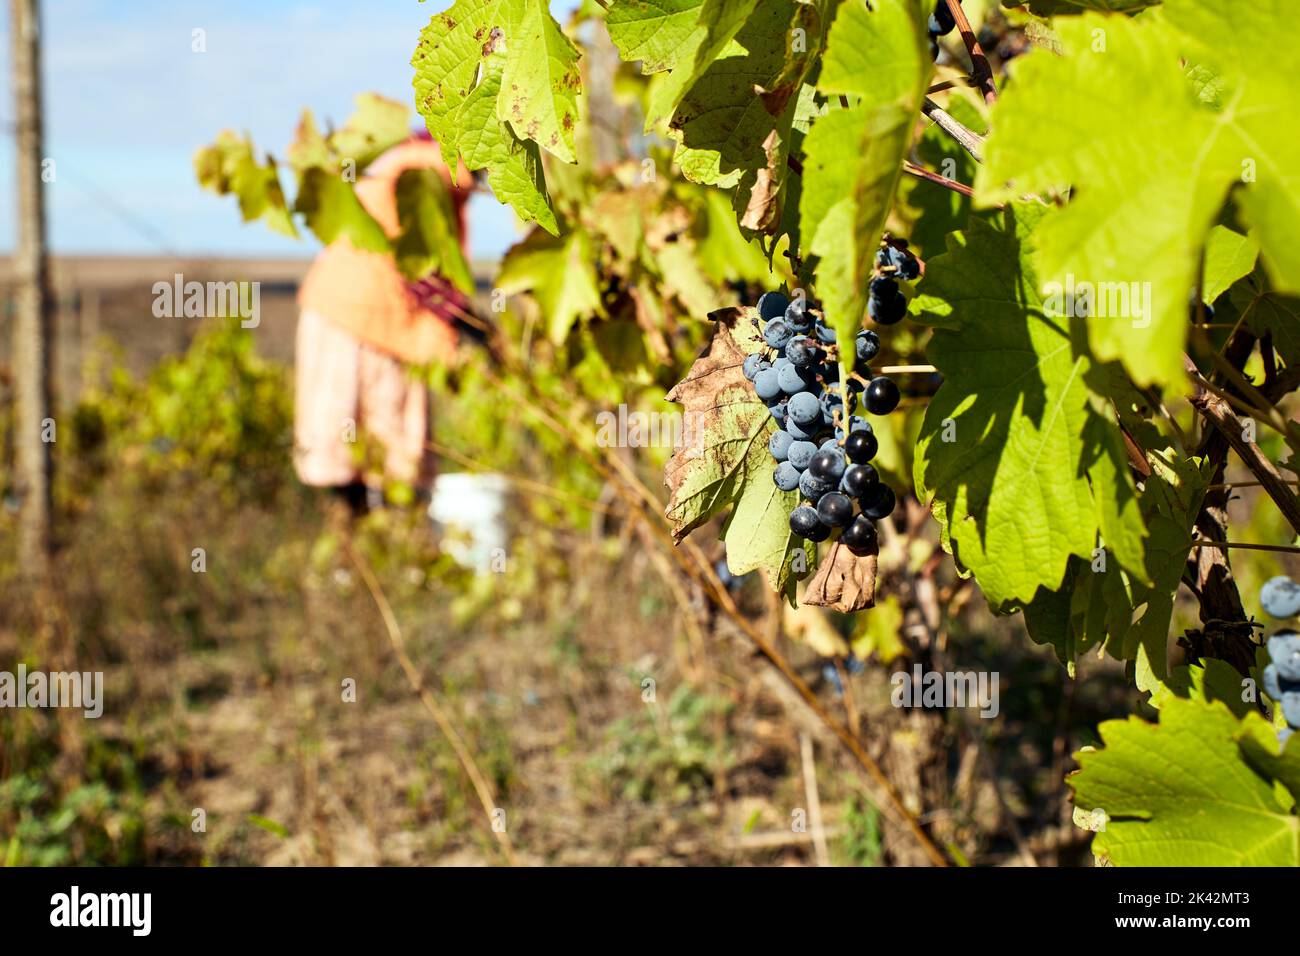 Grape on vineyard with person harvesting on background Stock Photo